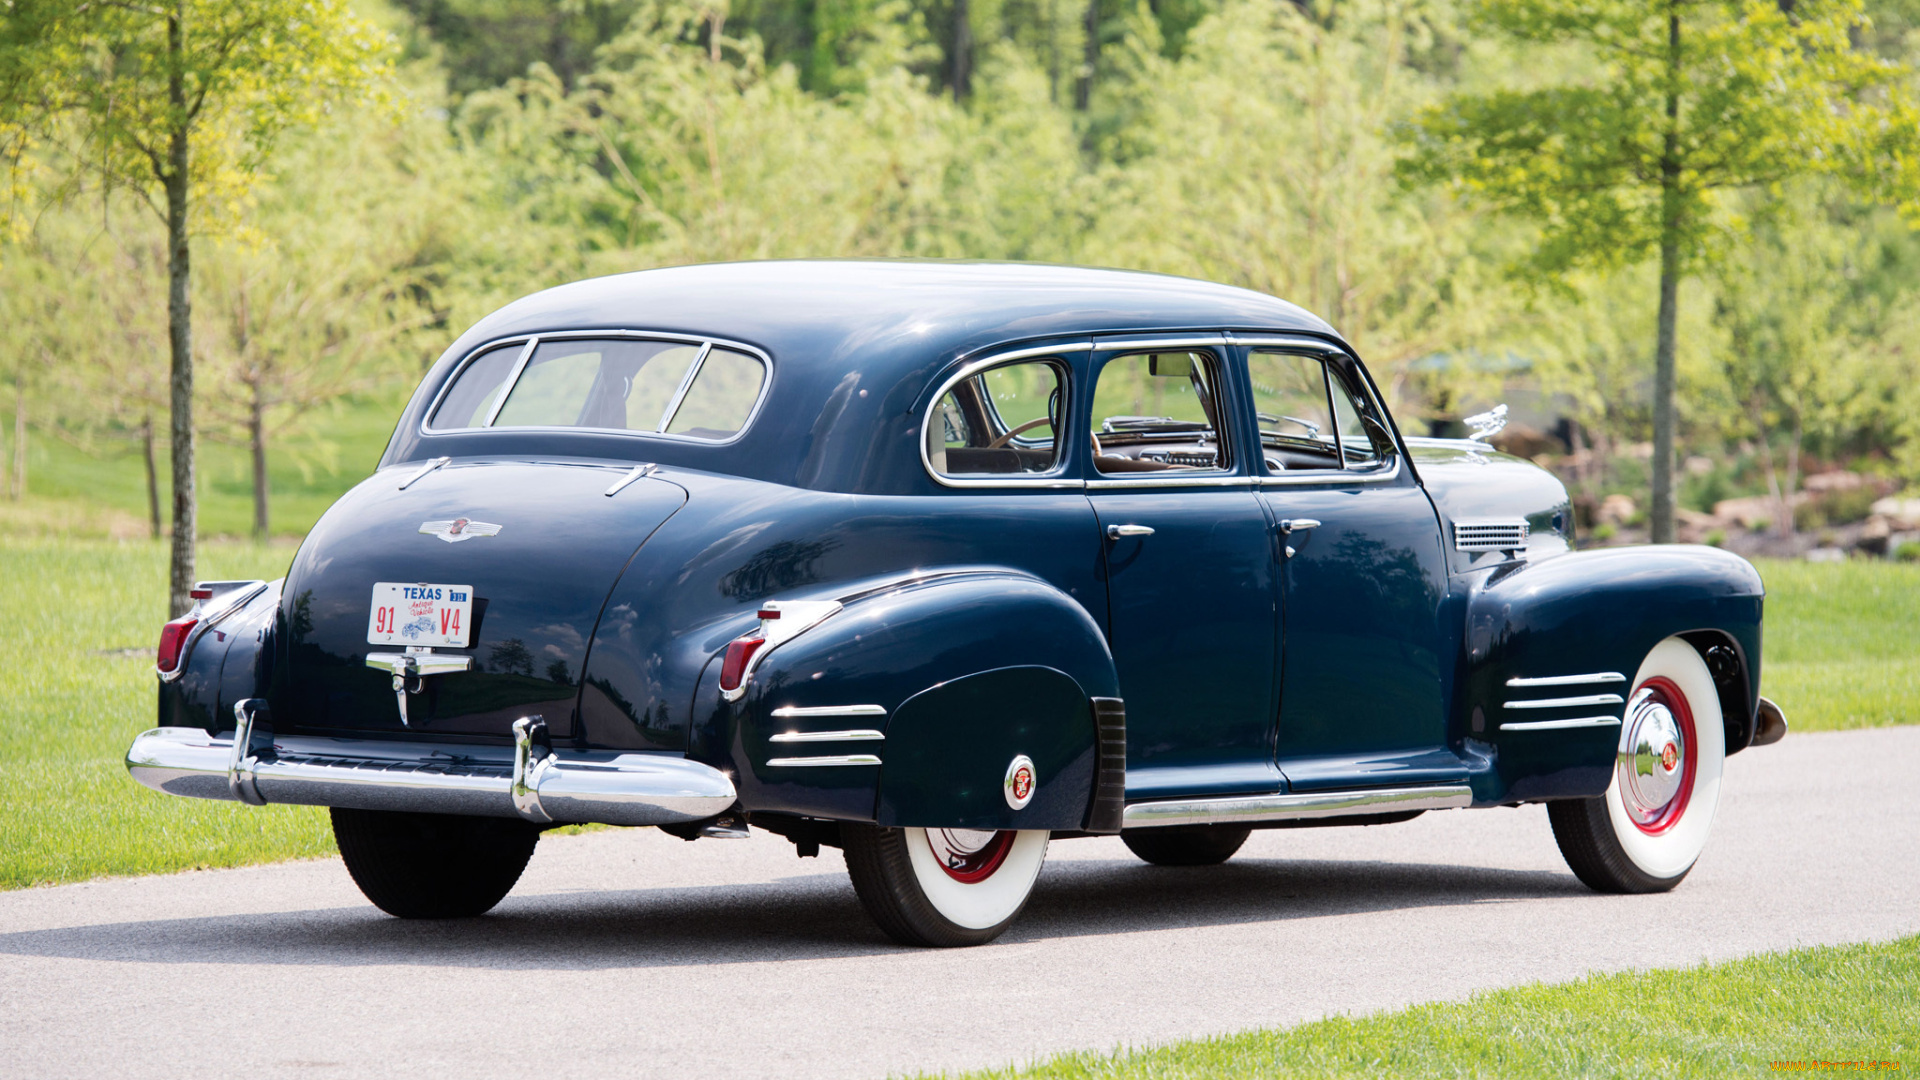 cadillac, series, 67, touring, sedan, by, fisher, 1941, автомобили, cadillac, series, 67, touring, sedan, fisher, 1941